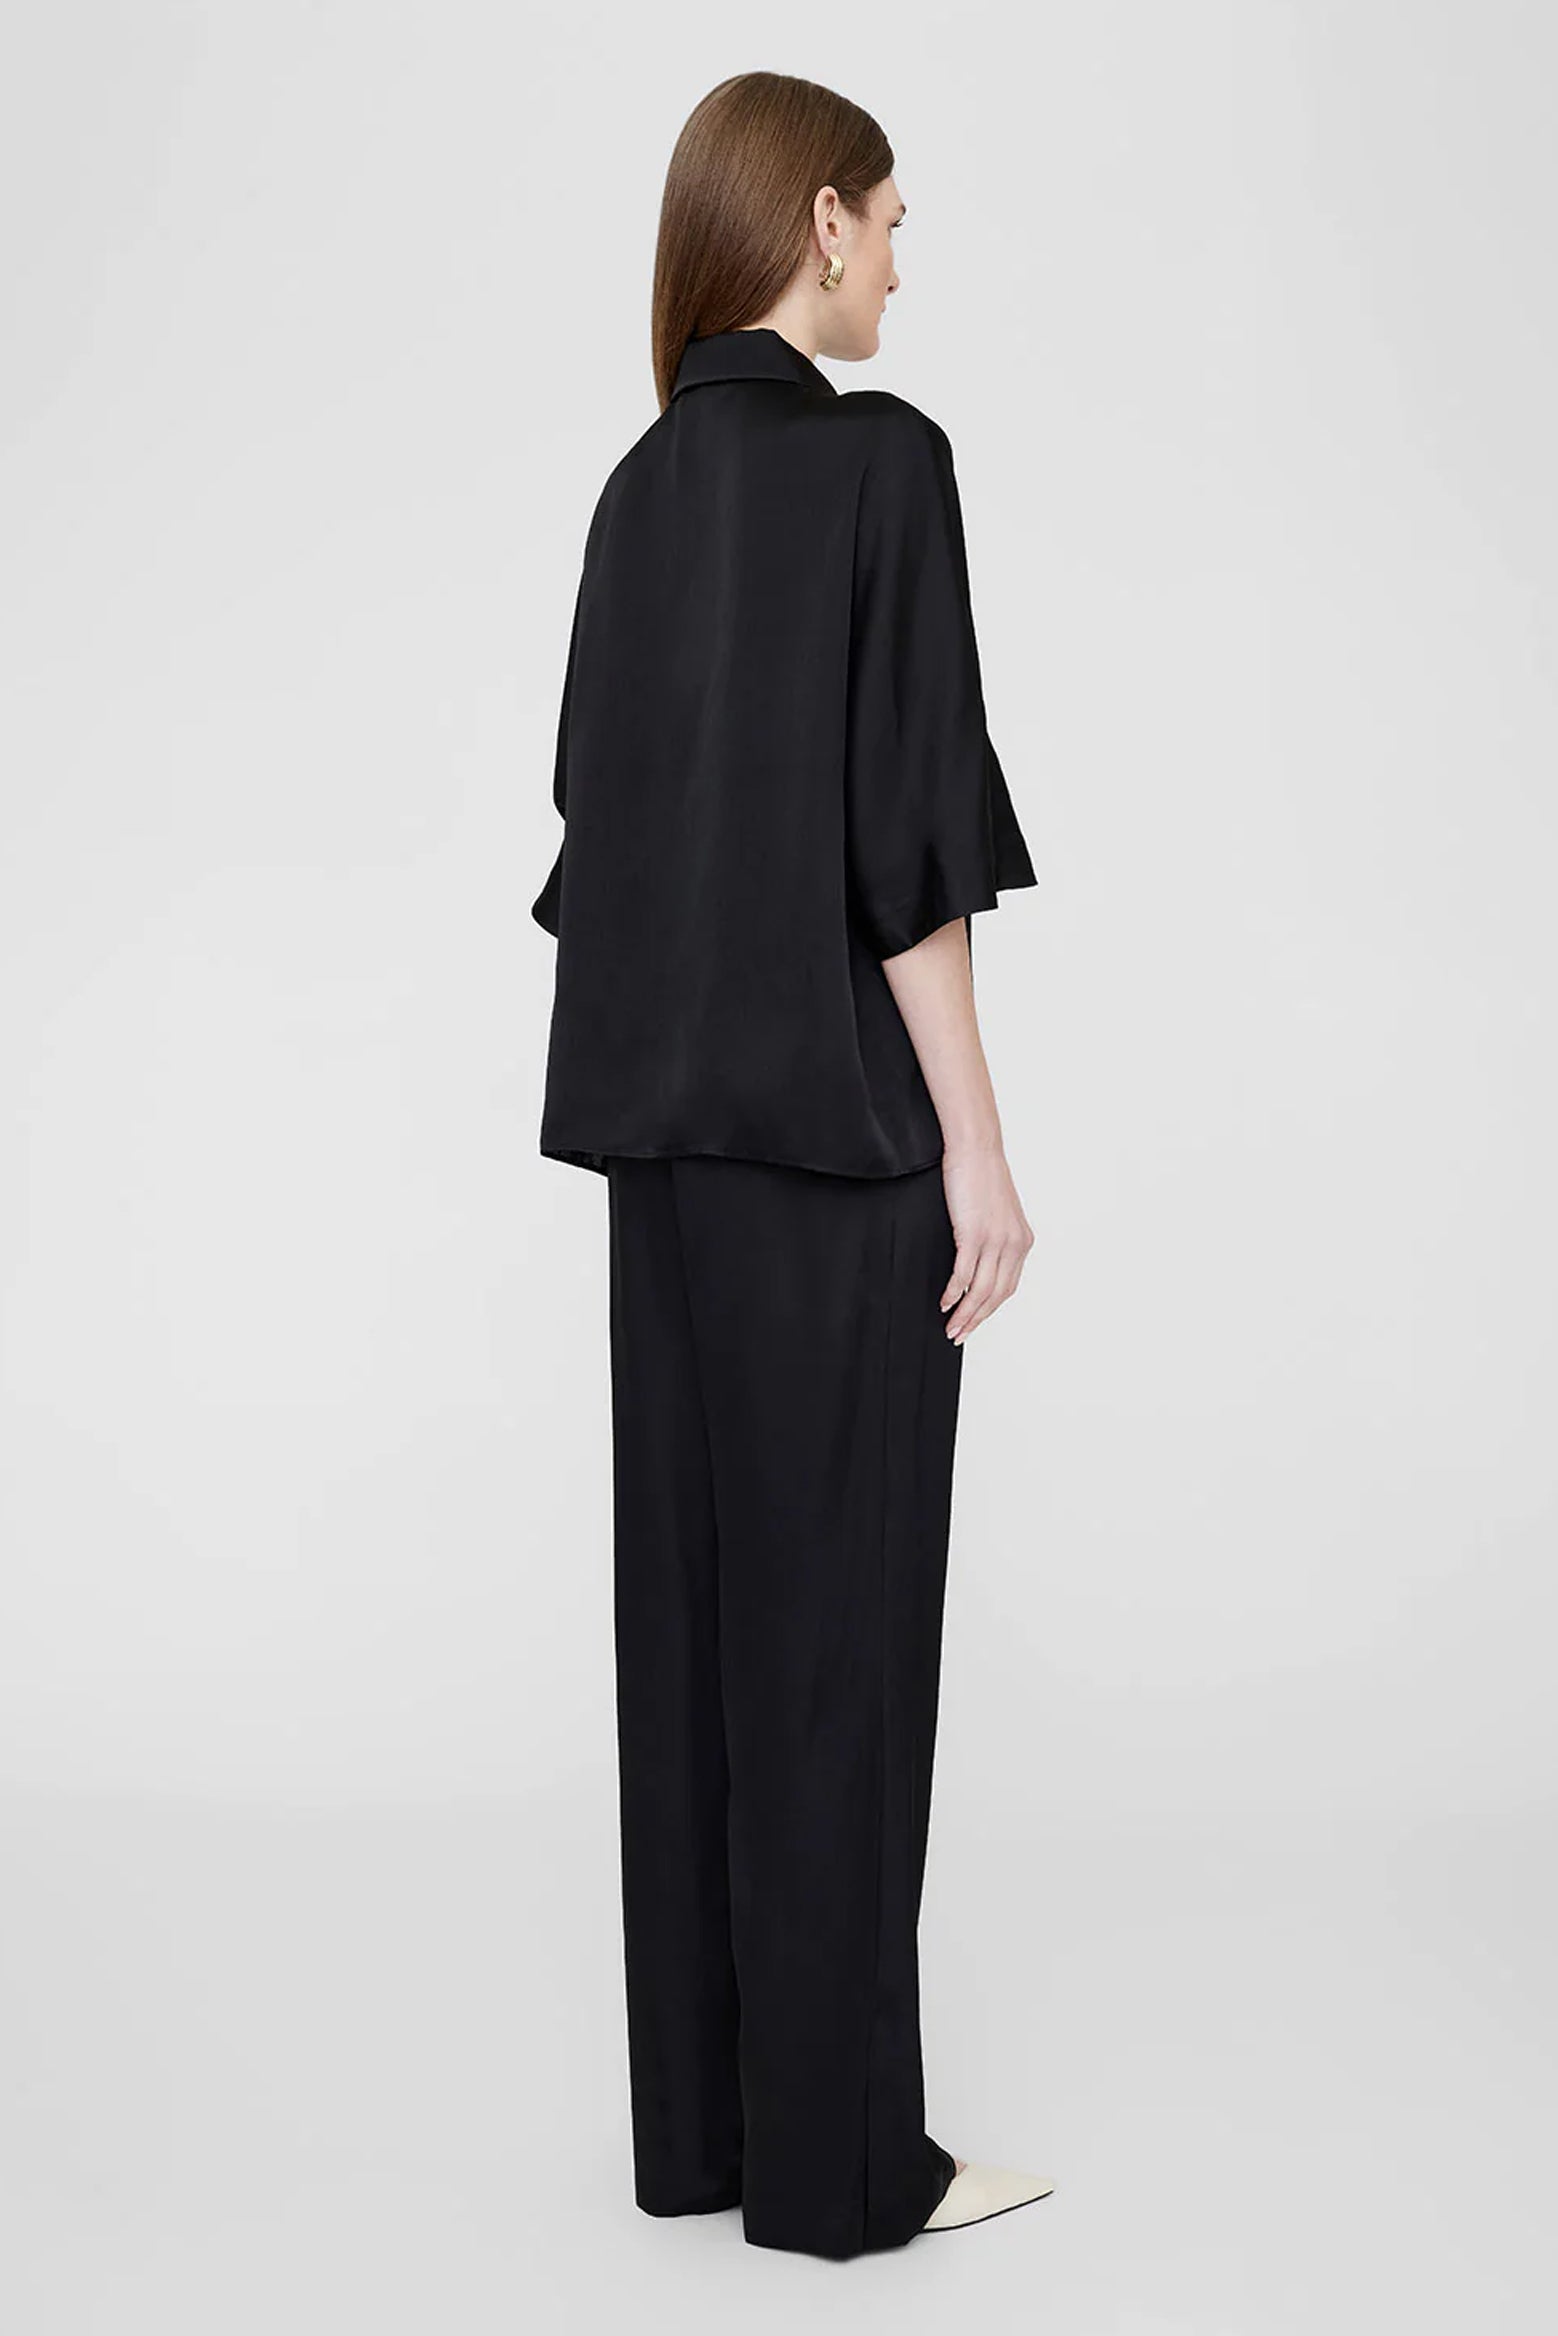 Anine Bing Aden Pant in Black available at The New Trend Australia.